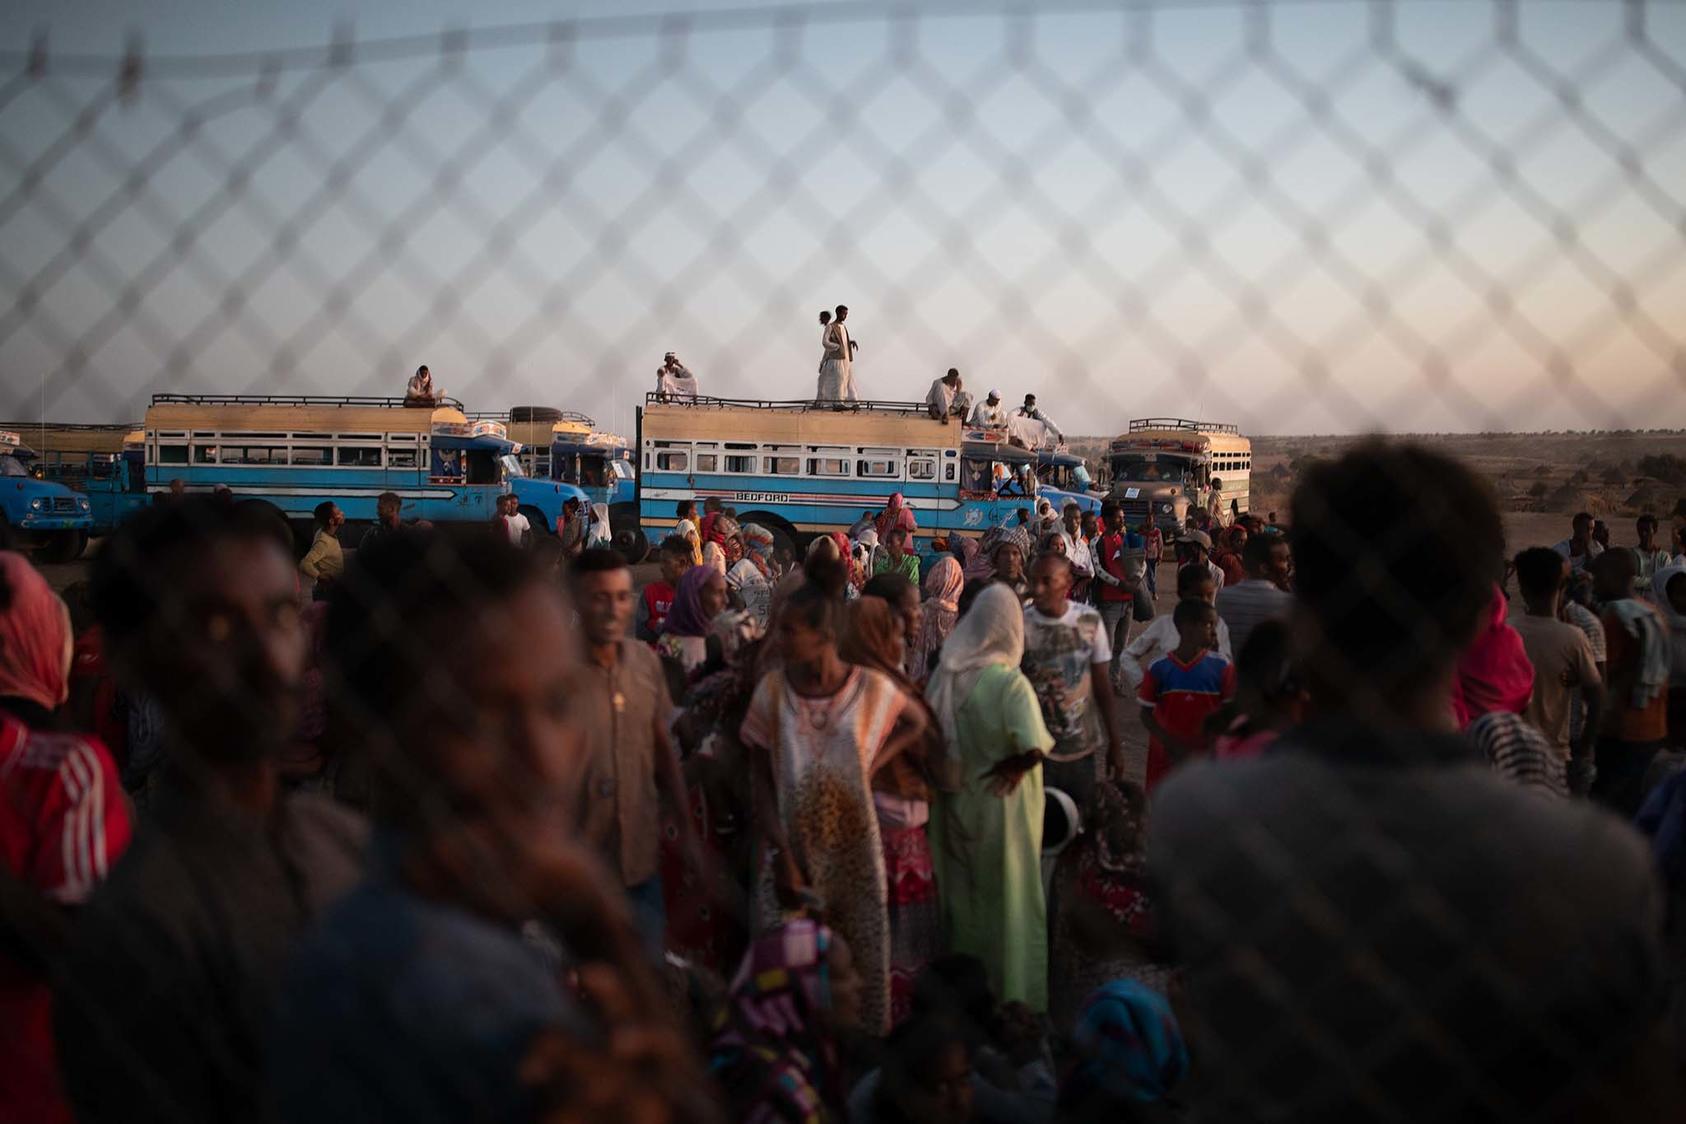 Ethiopian refugees wait for relief supplies at a United Nations compound in Hamdayet, Sudan, on Saturday, Dec. 5, 2020. (Tyler Hicks/The New York Times)